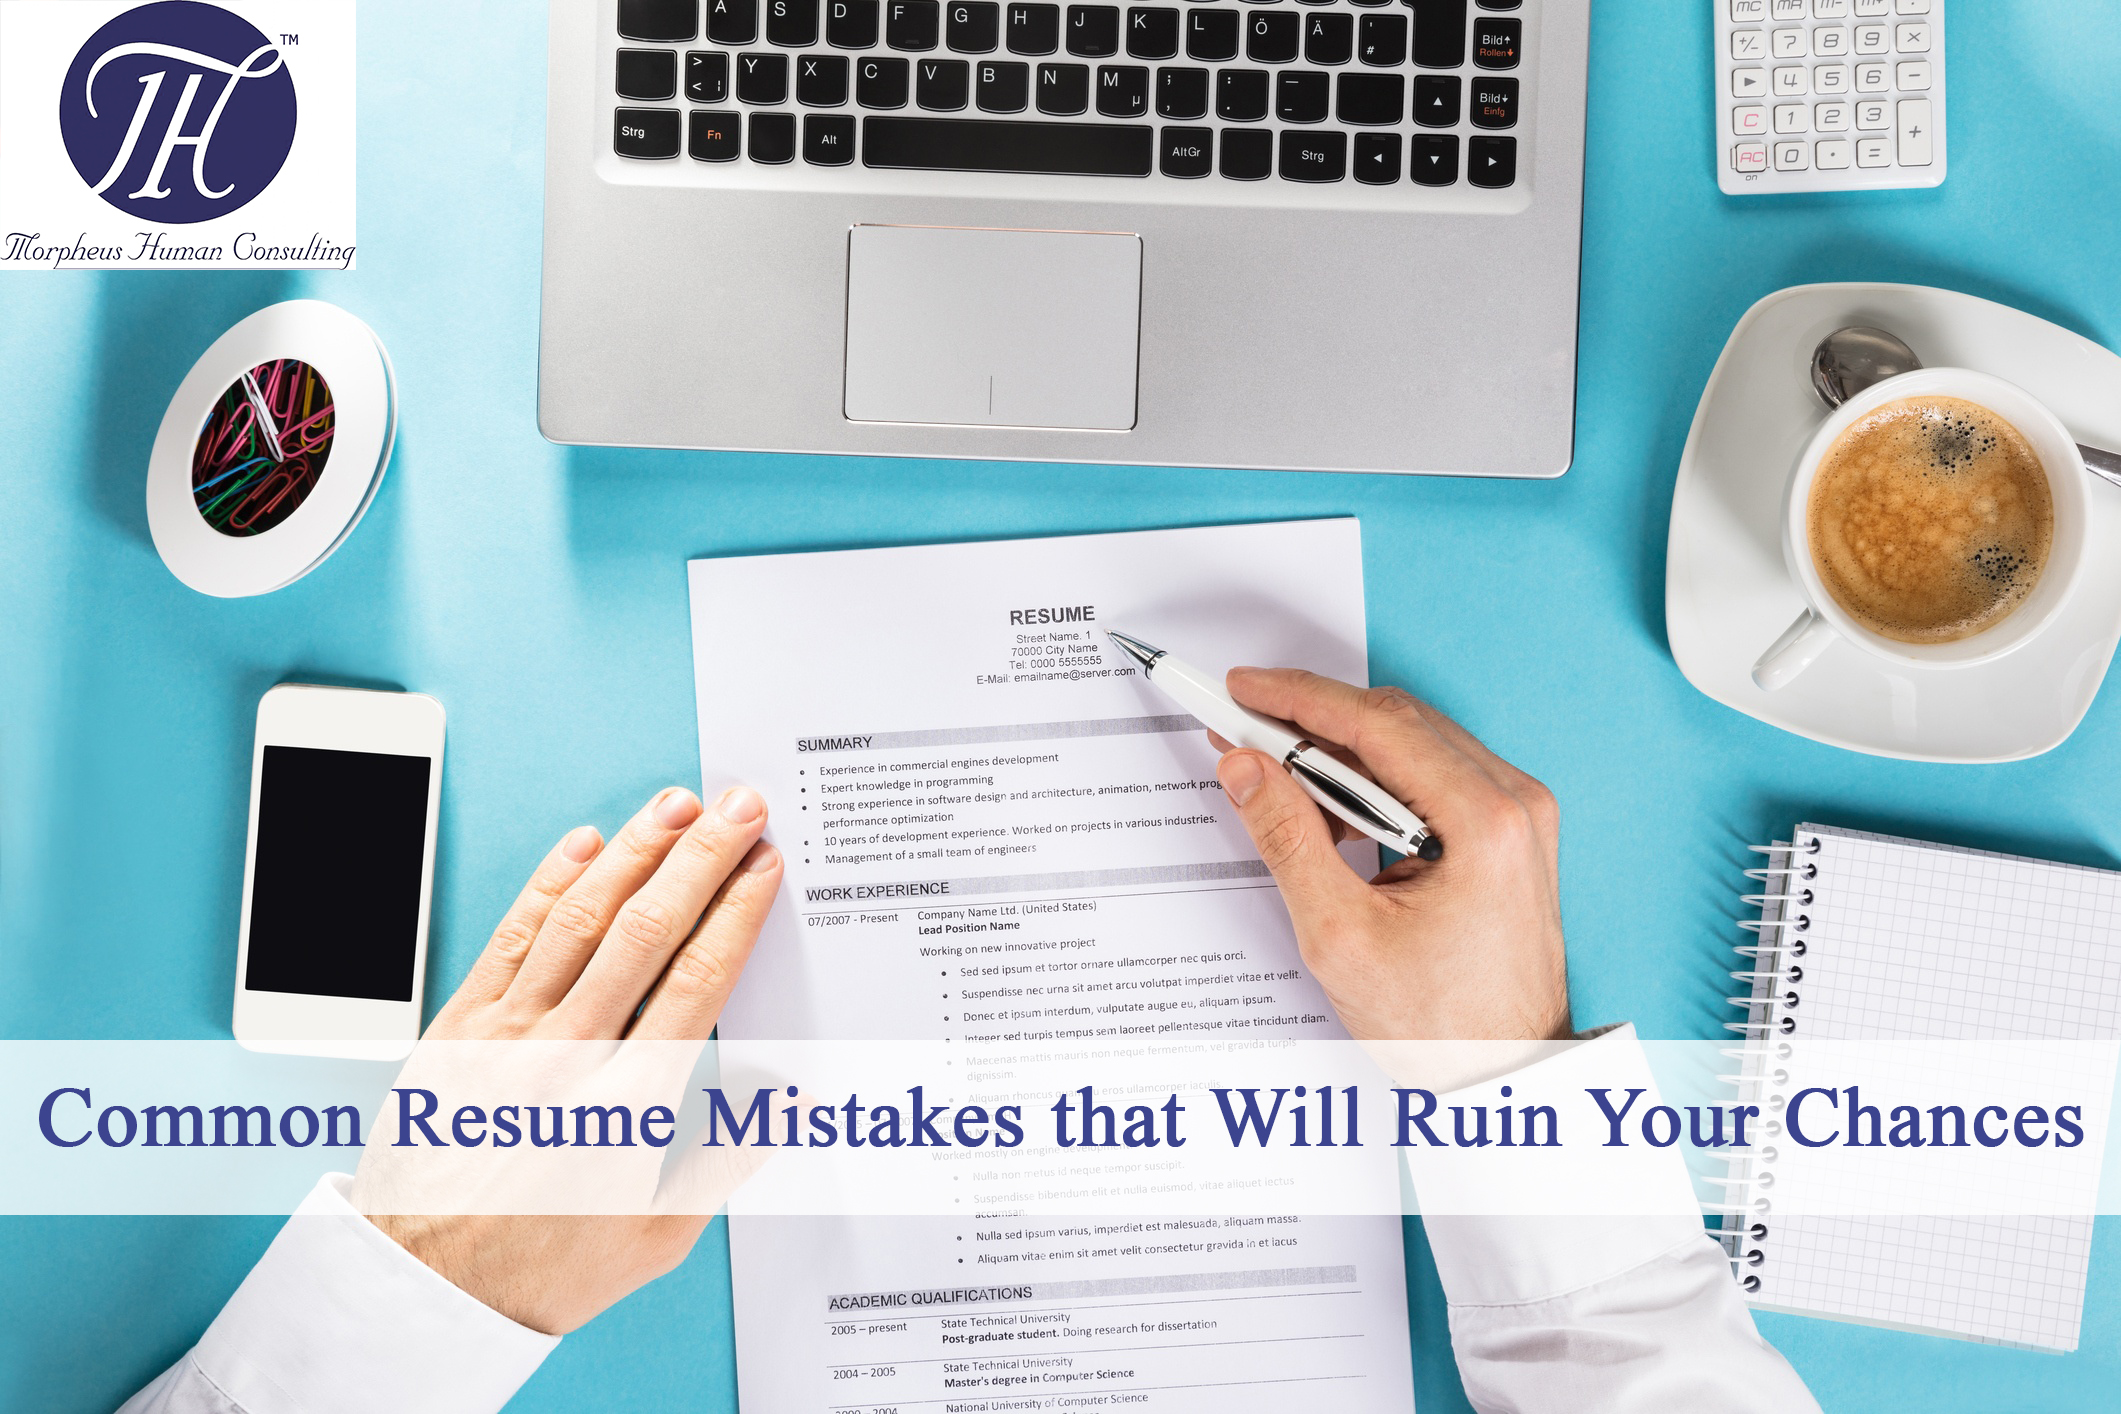 Common Resume Mistakes that Will Ruin Your Chances